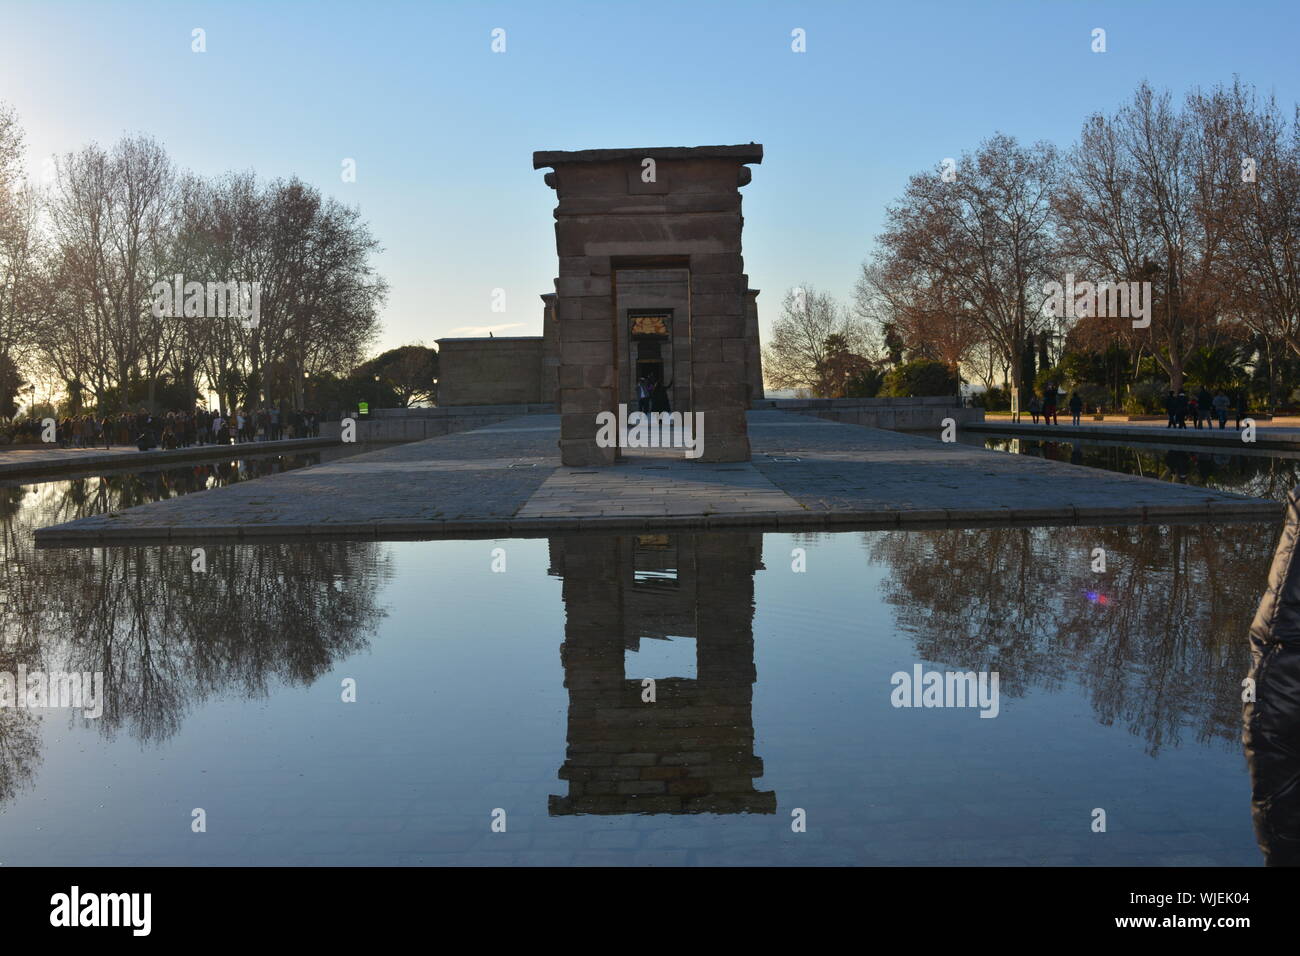 Temple of Debod-An ancient Egyptian temple in Madrid, Spain Stock Photo